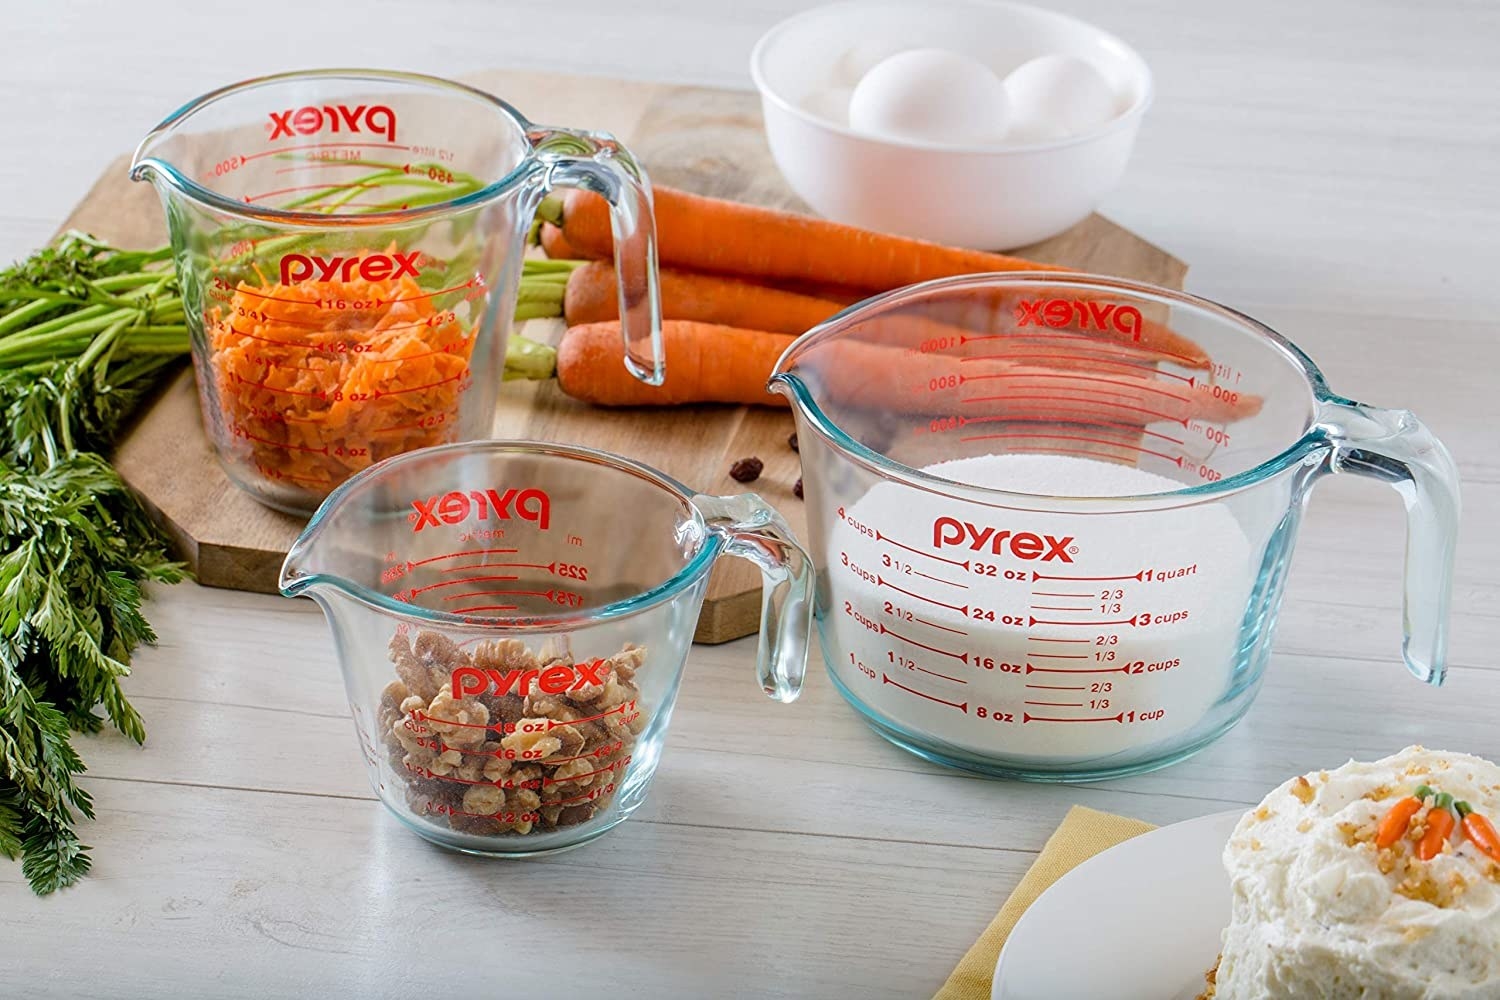 The three measuring cups filled with various ingredients